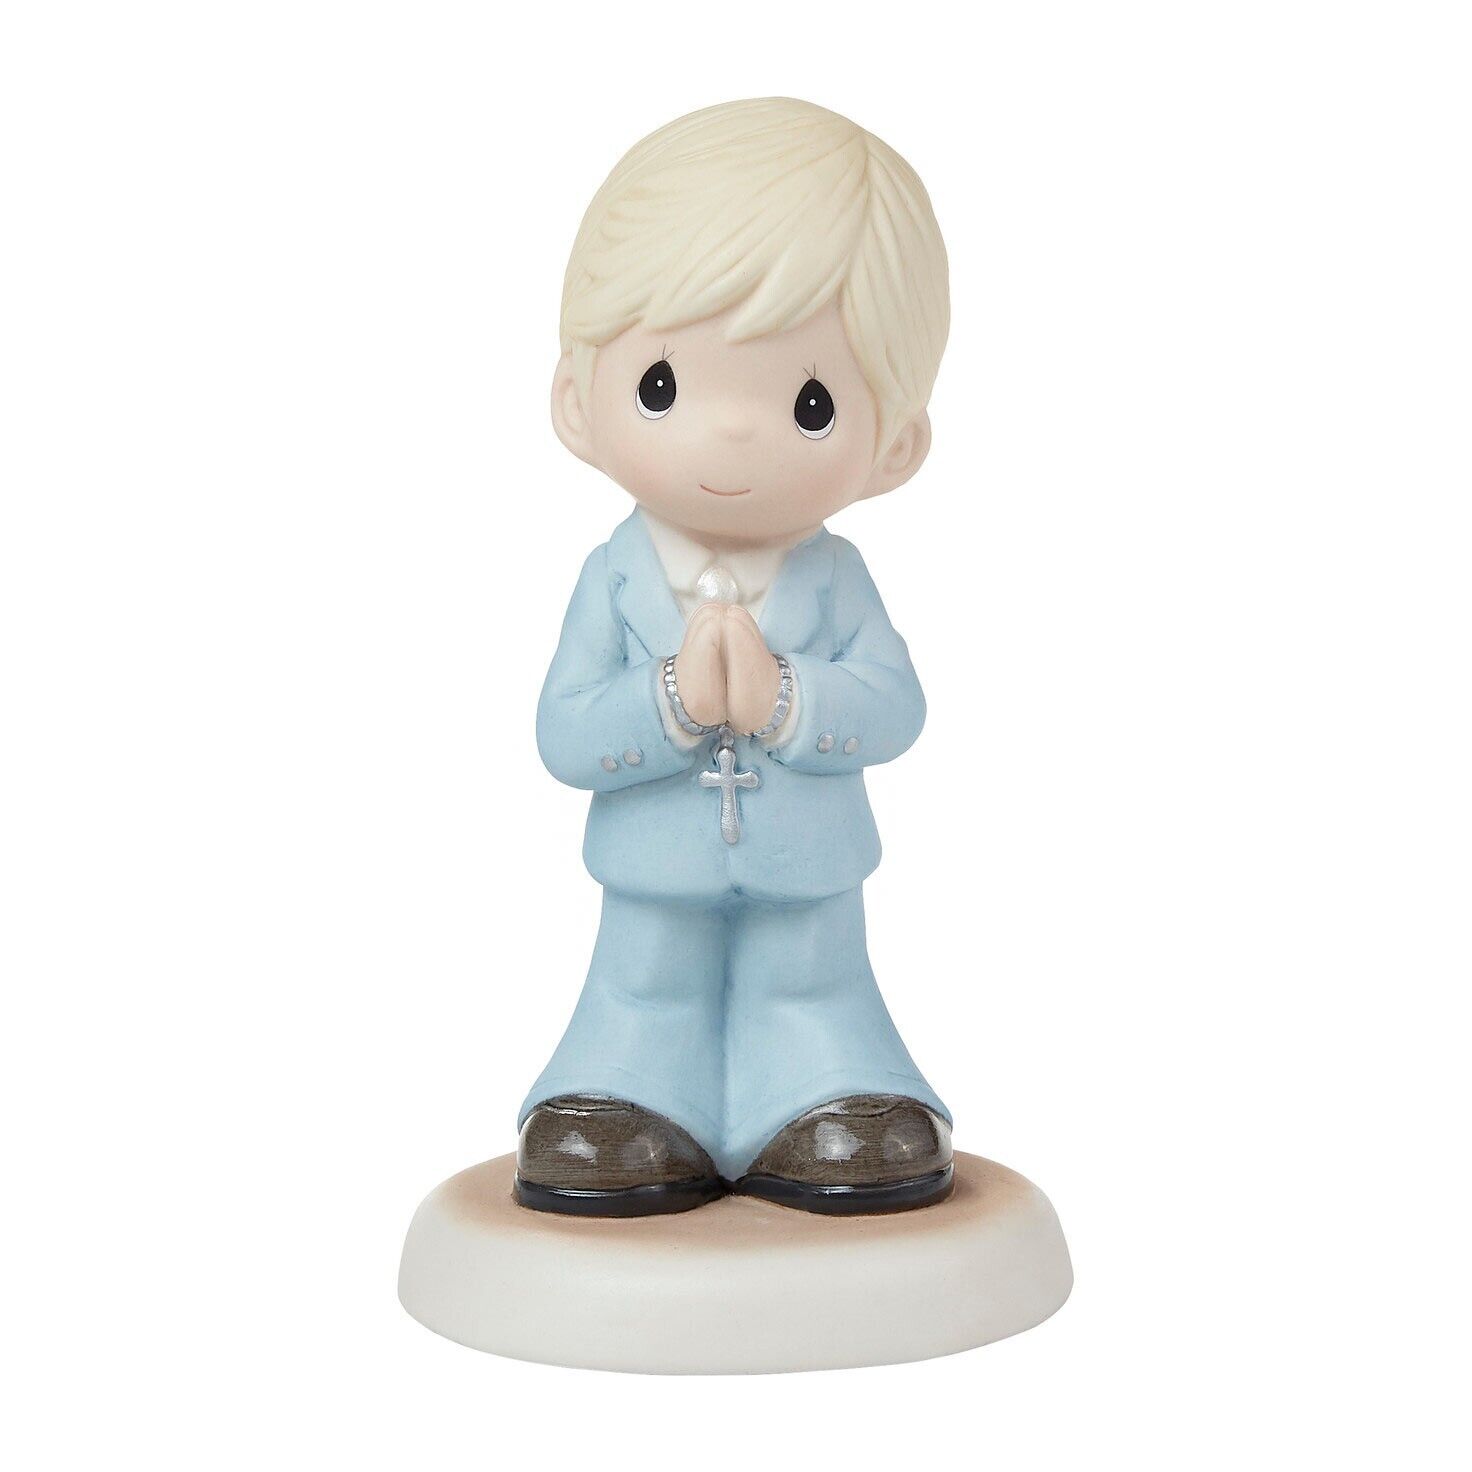 Precious Moments Figurine Blessings On Your First Communion 5.25in Blonde 222022